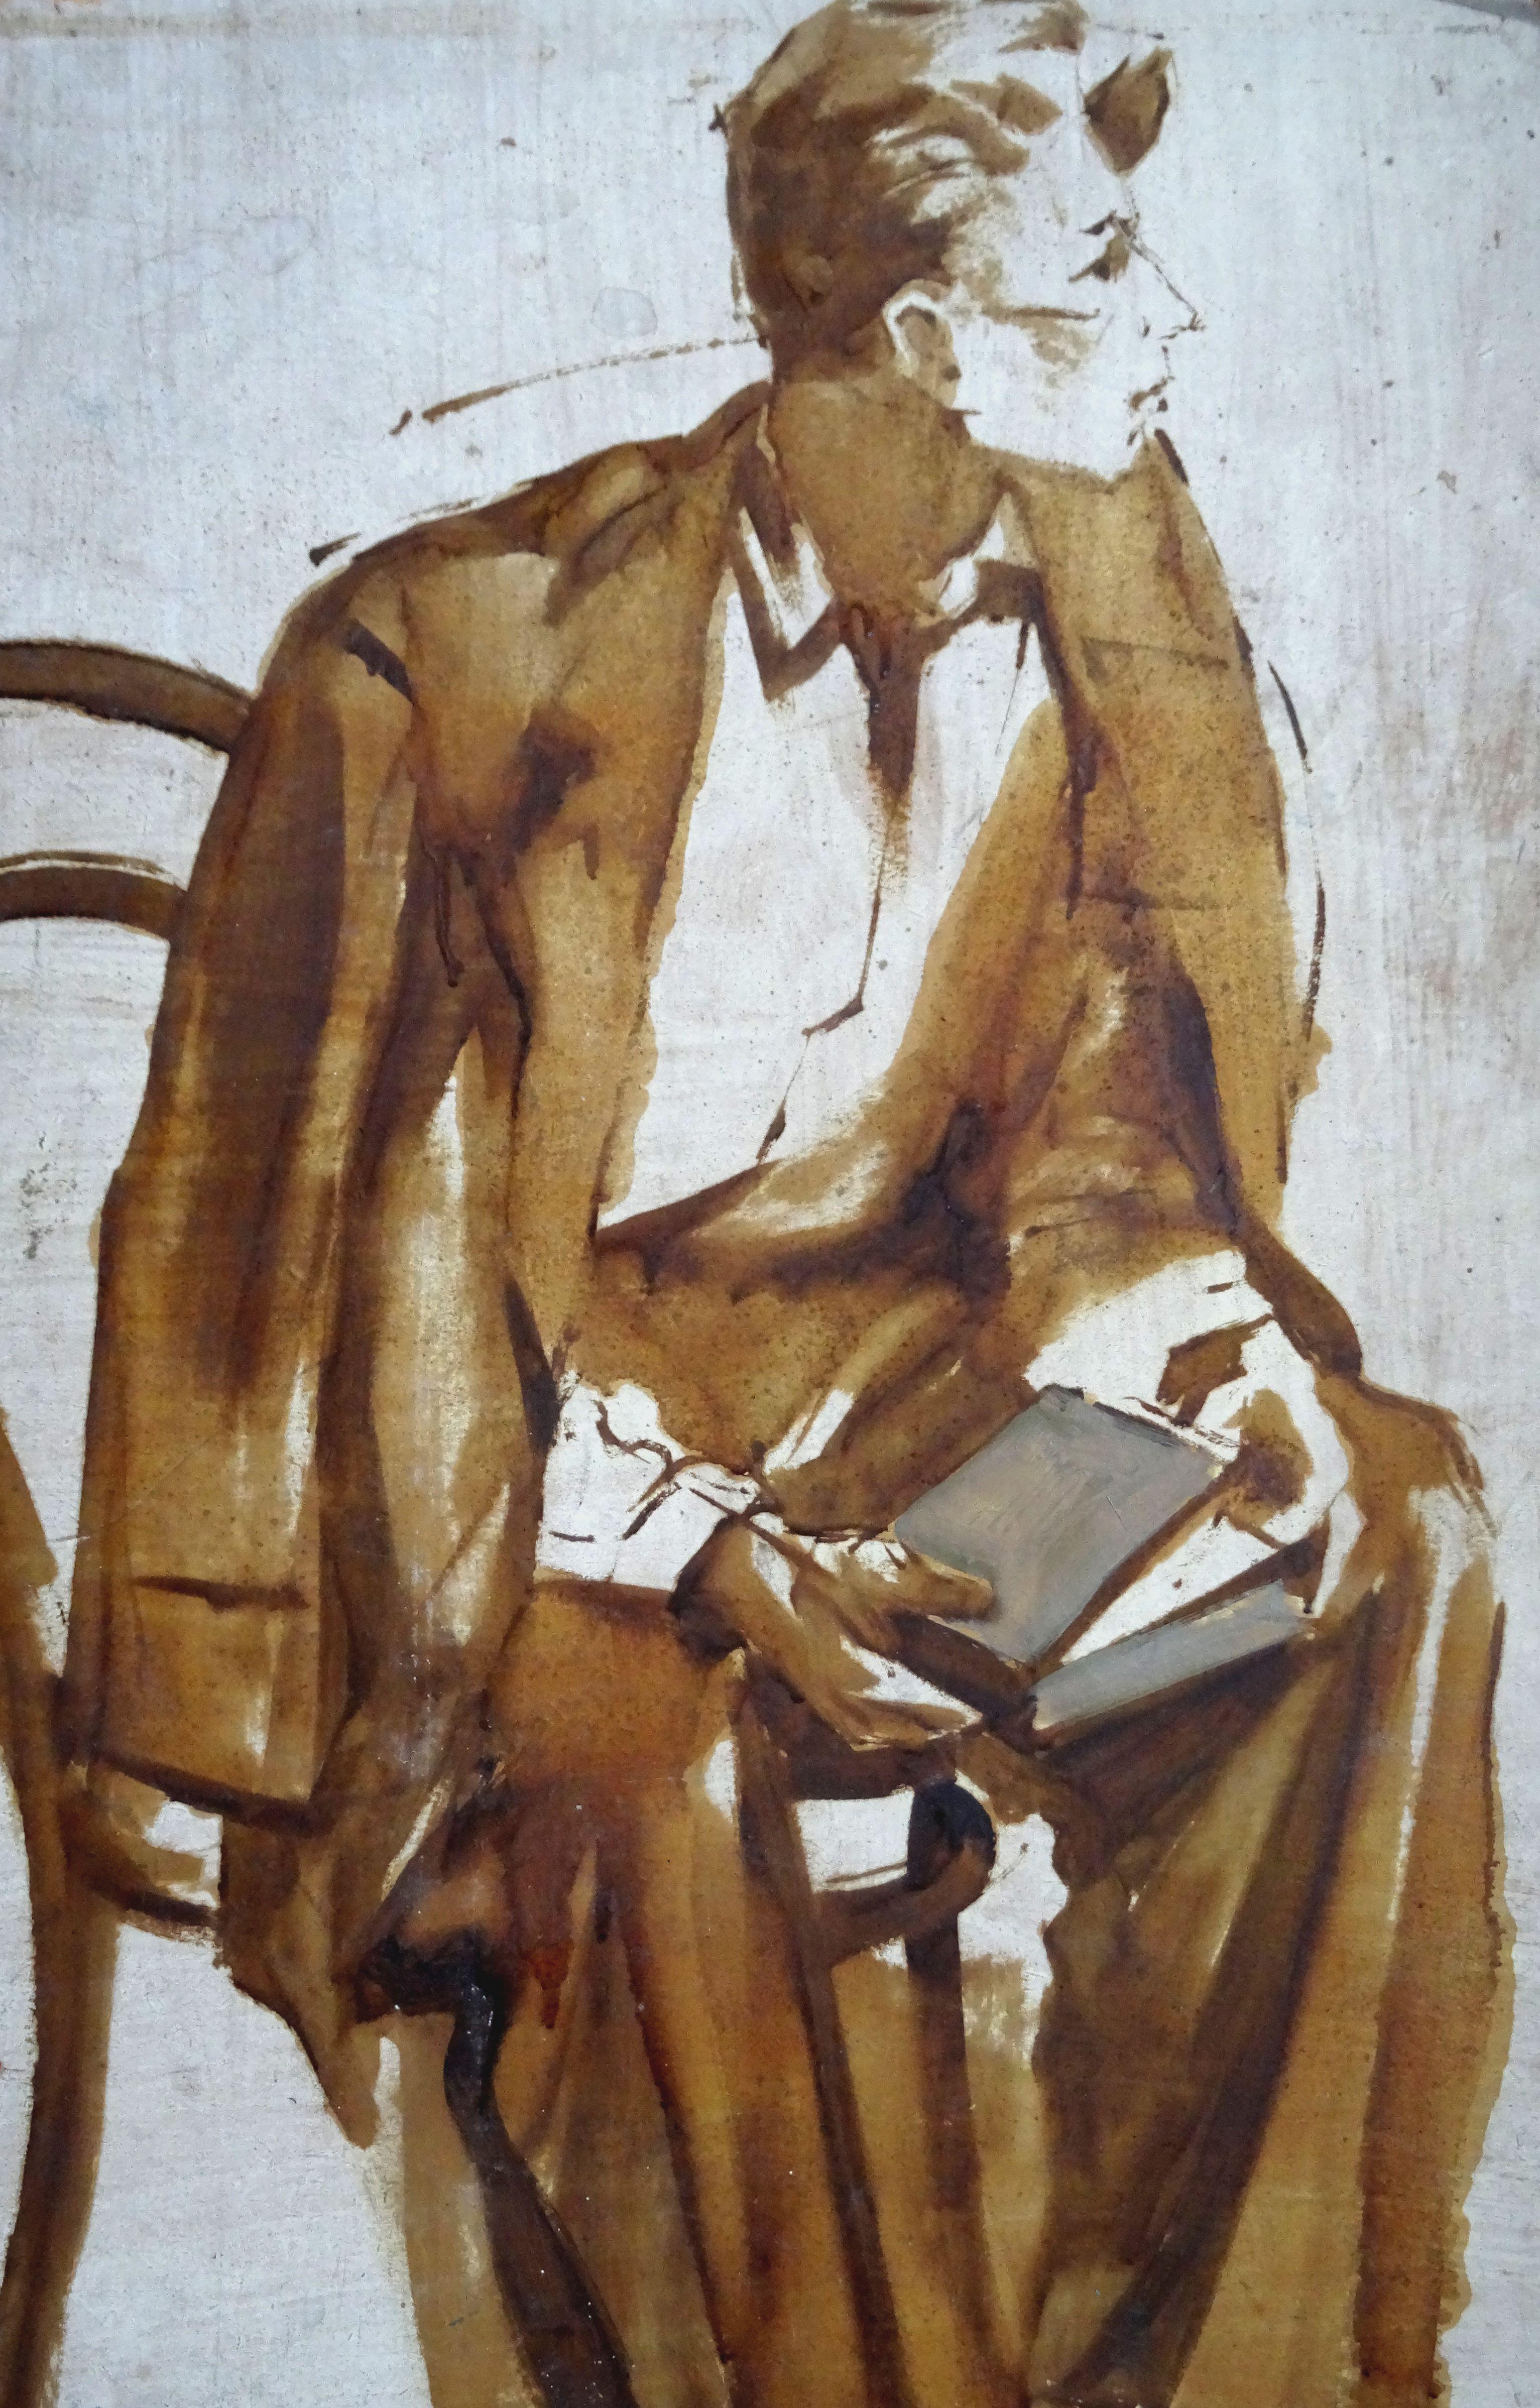 Act. Double sided. cardboard, oil, 71x45 cm - Painting by German Dontsov